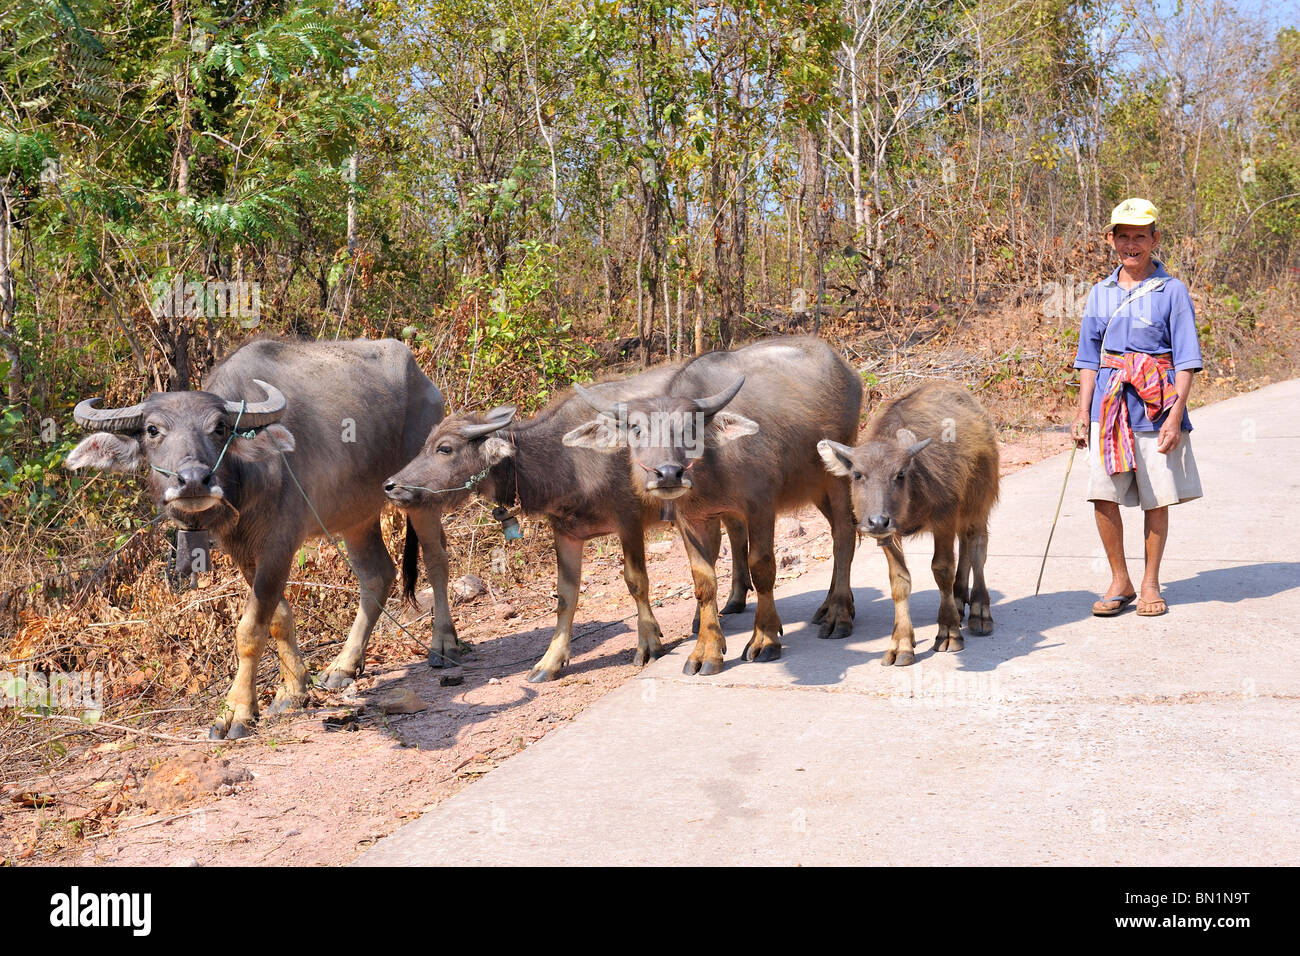 Farmer walking with his water buffalo's on the road in Isan, it is Thailand's poorest region. Stock Photo